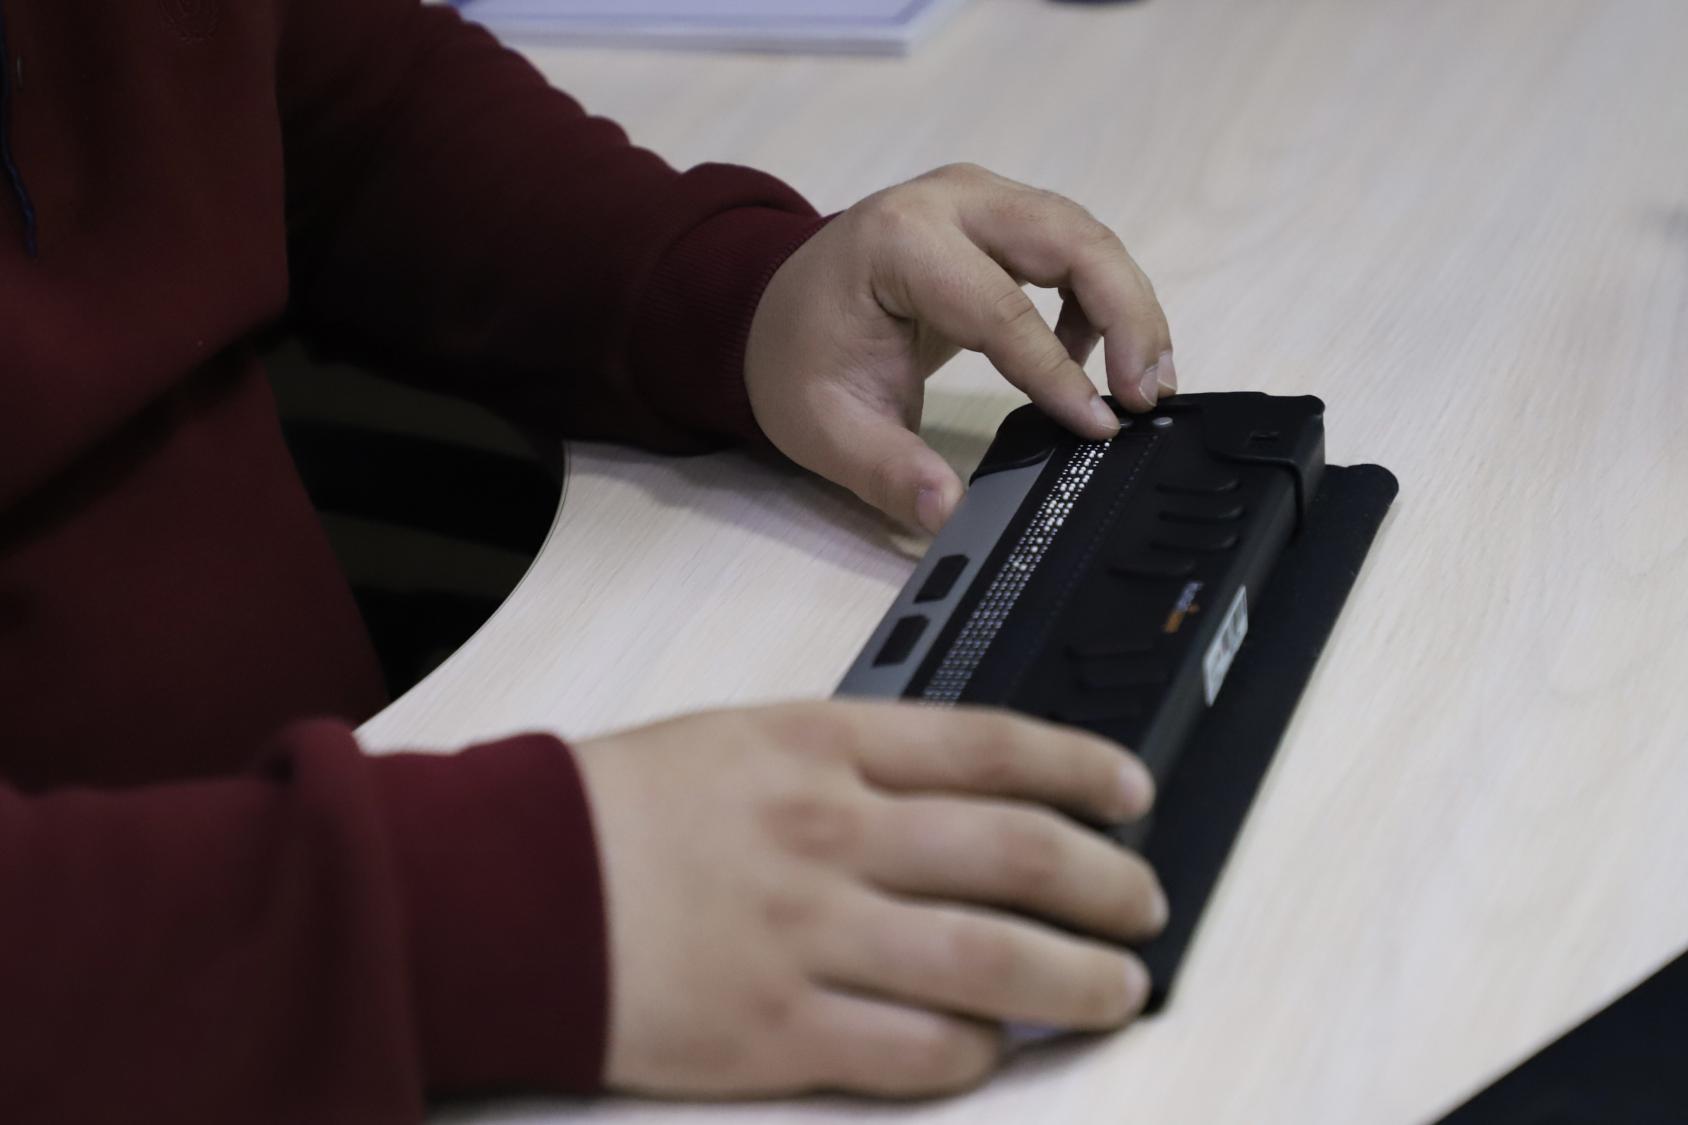 Hands of a person in a red shirt holding a Braille reading instrument